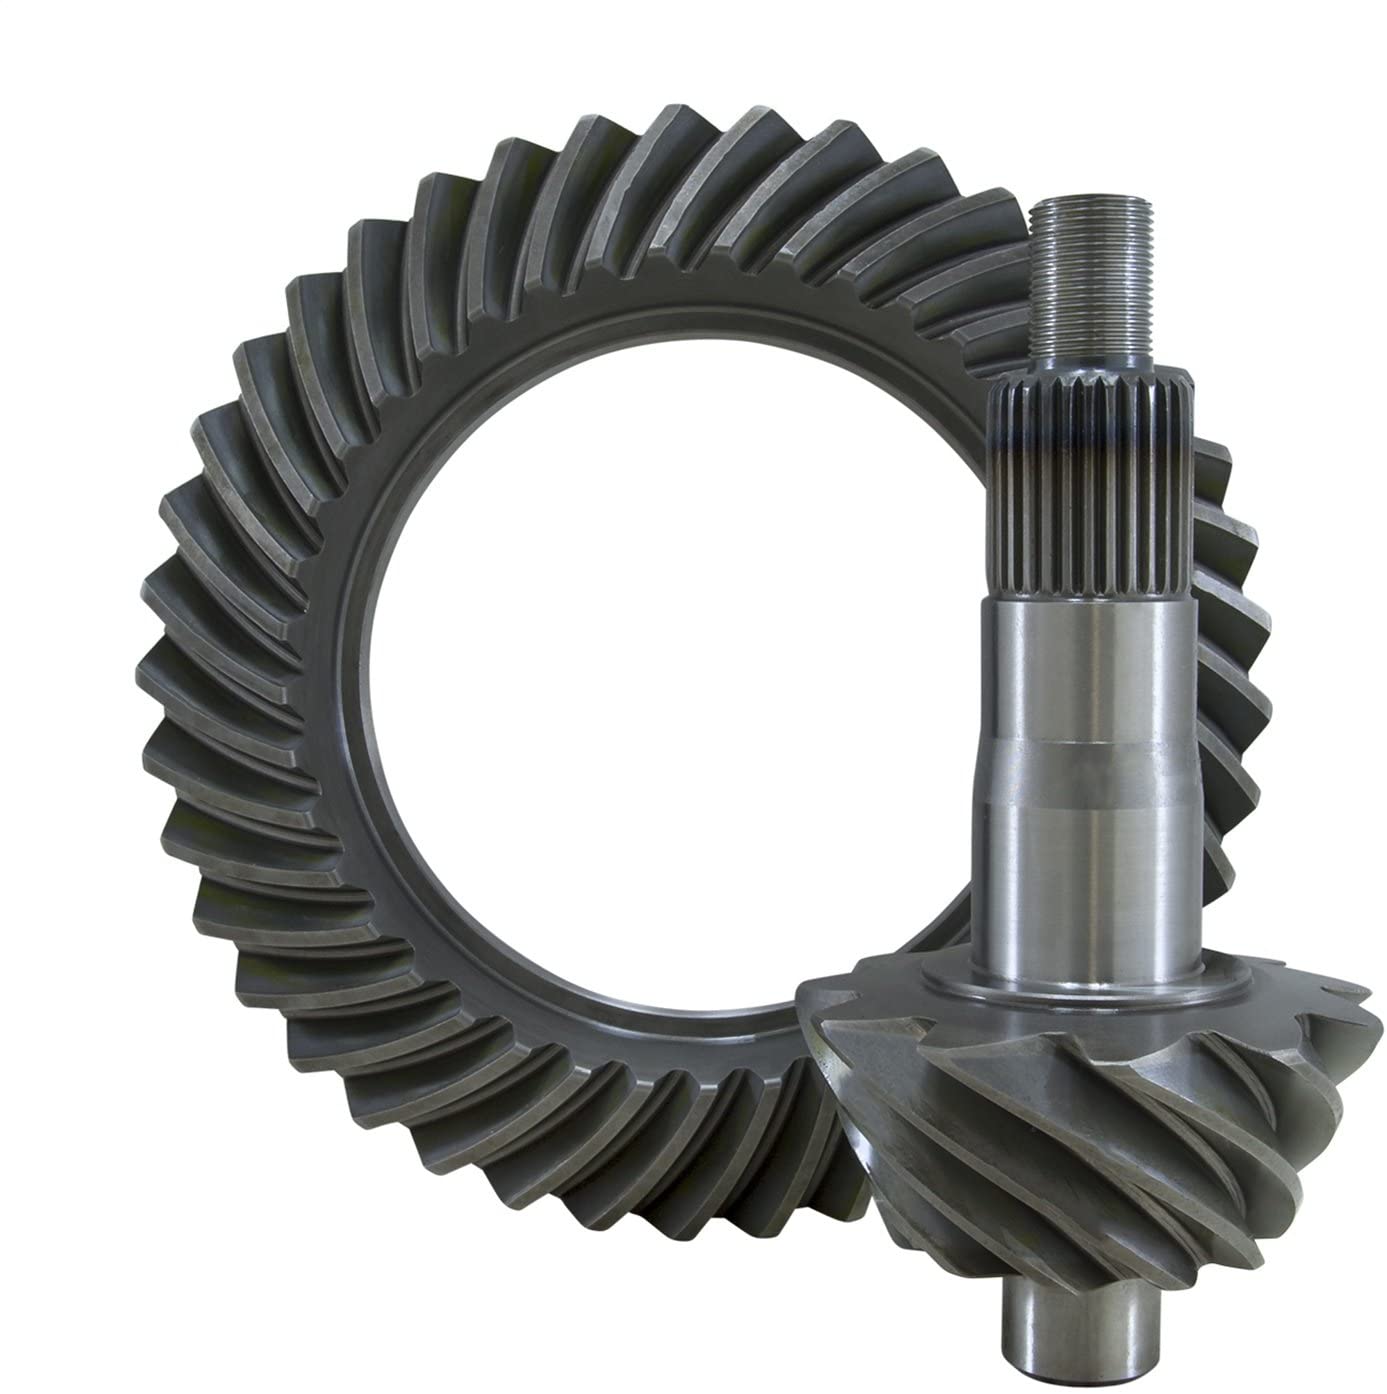 USA Standard Gear (ZG GM14T-456T) Ring & Pinion Gear Set for GM 14-Bolt Truck 10.5 Differential